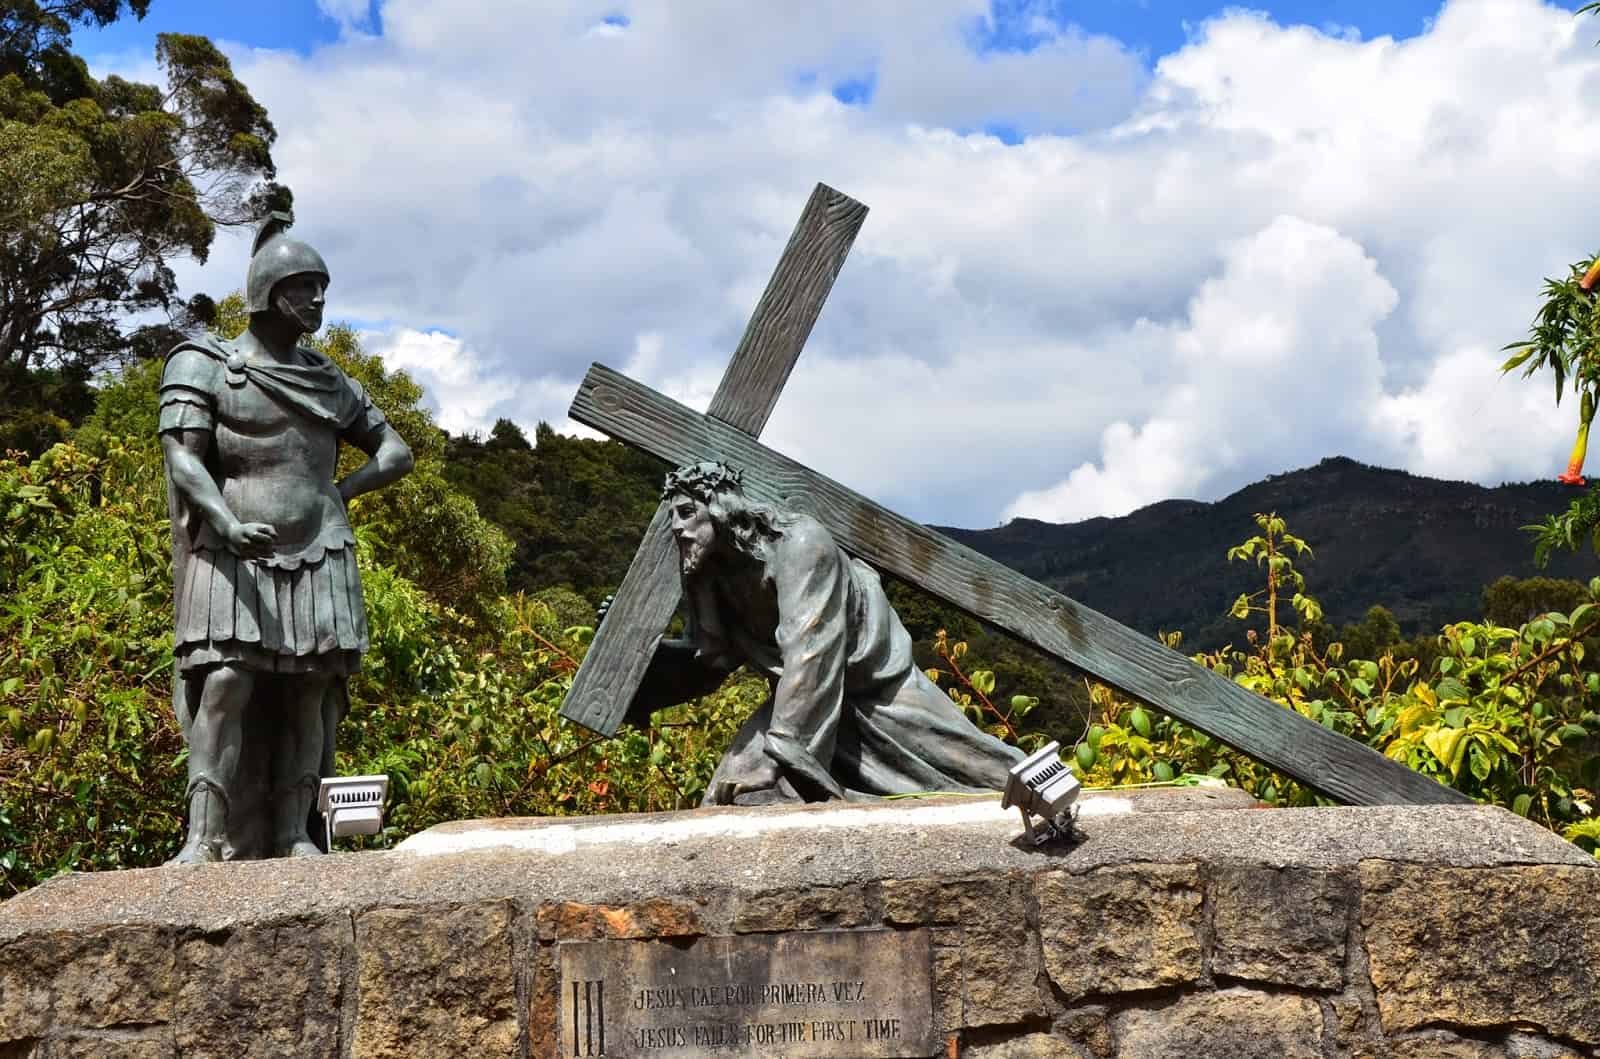 3rd Station of the Cross on the Via Crucis on Monserrate in Bogotá, Colombia